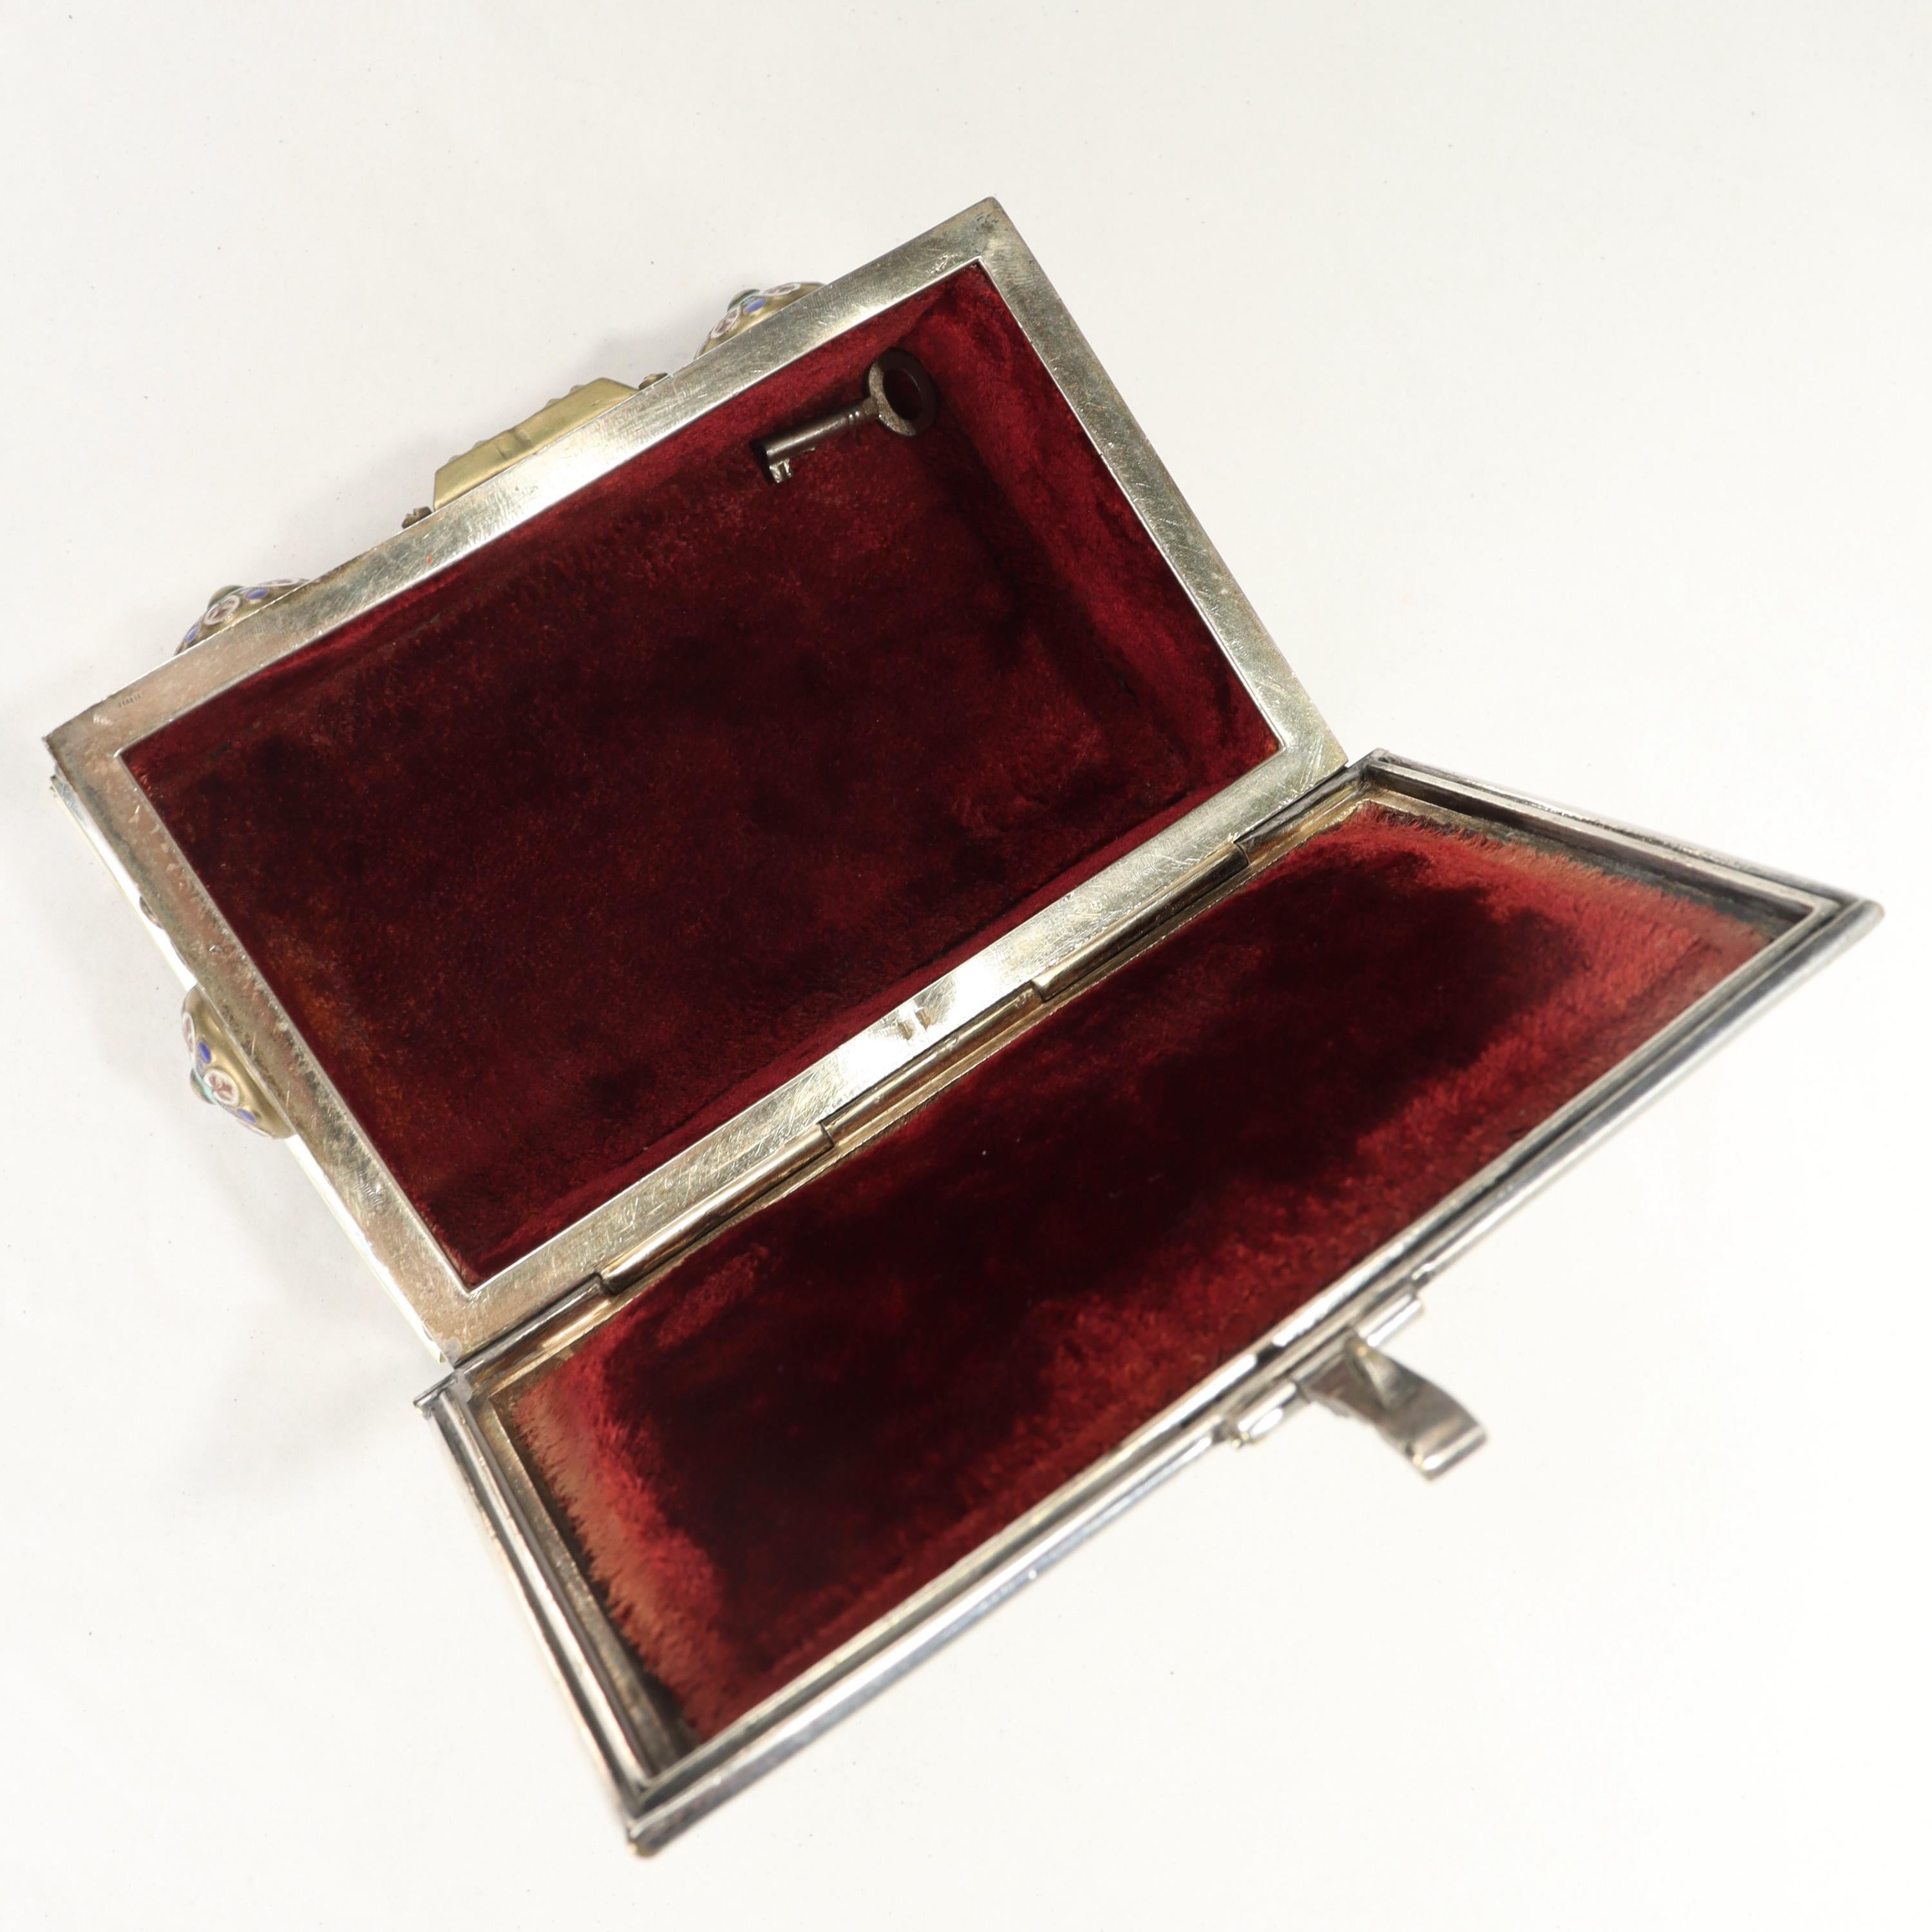 Antique Silver Plated & Enameled Table Box or Casket in the Russian Taste For Sale 5